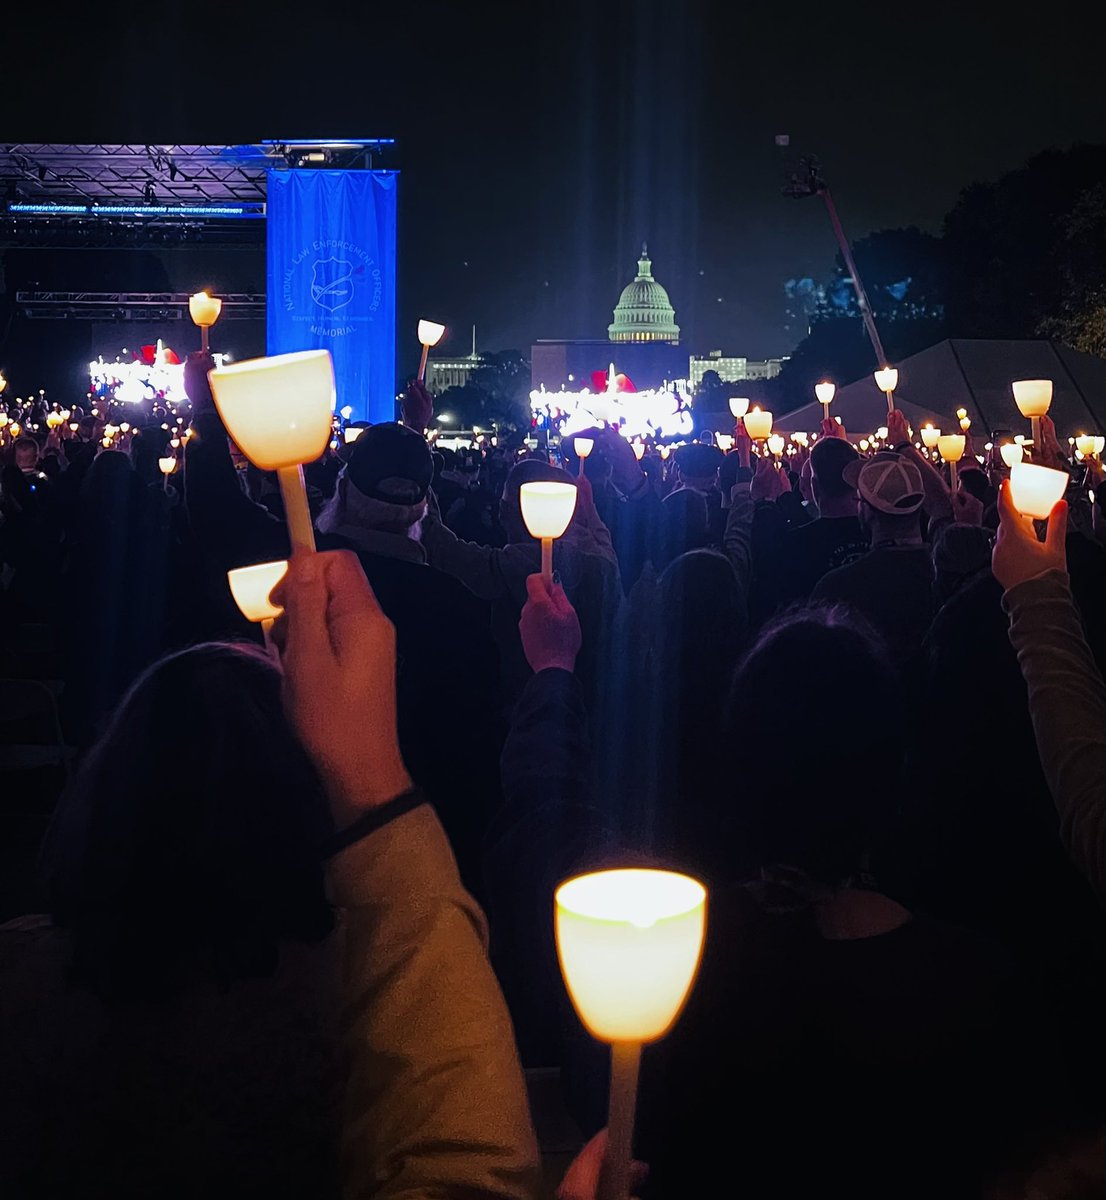 Honoring all fallen police officers at the Candlelight Vigil tonight during Police Week in Washington DC. Difficult to hear Grand Prairie Police Officer Brandon Tsai’s name read.